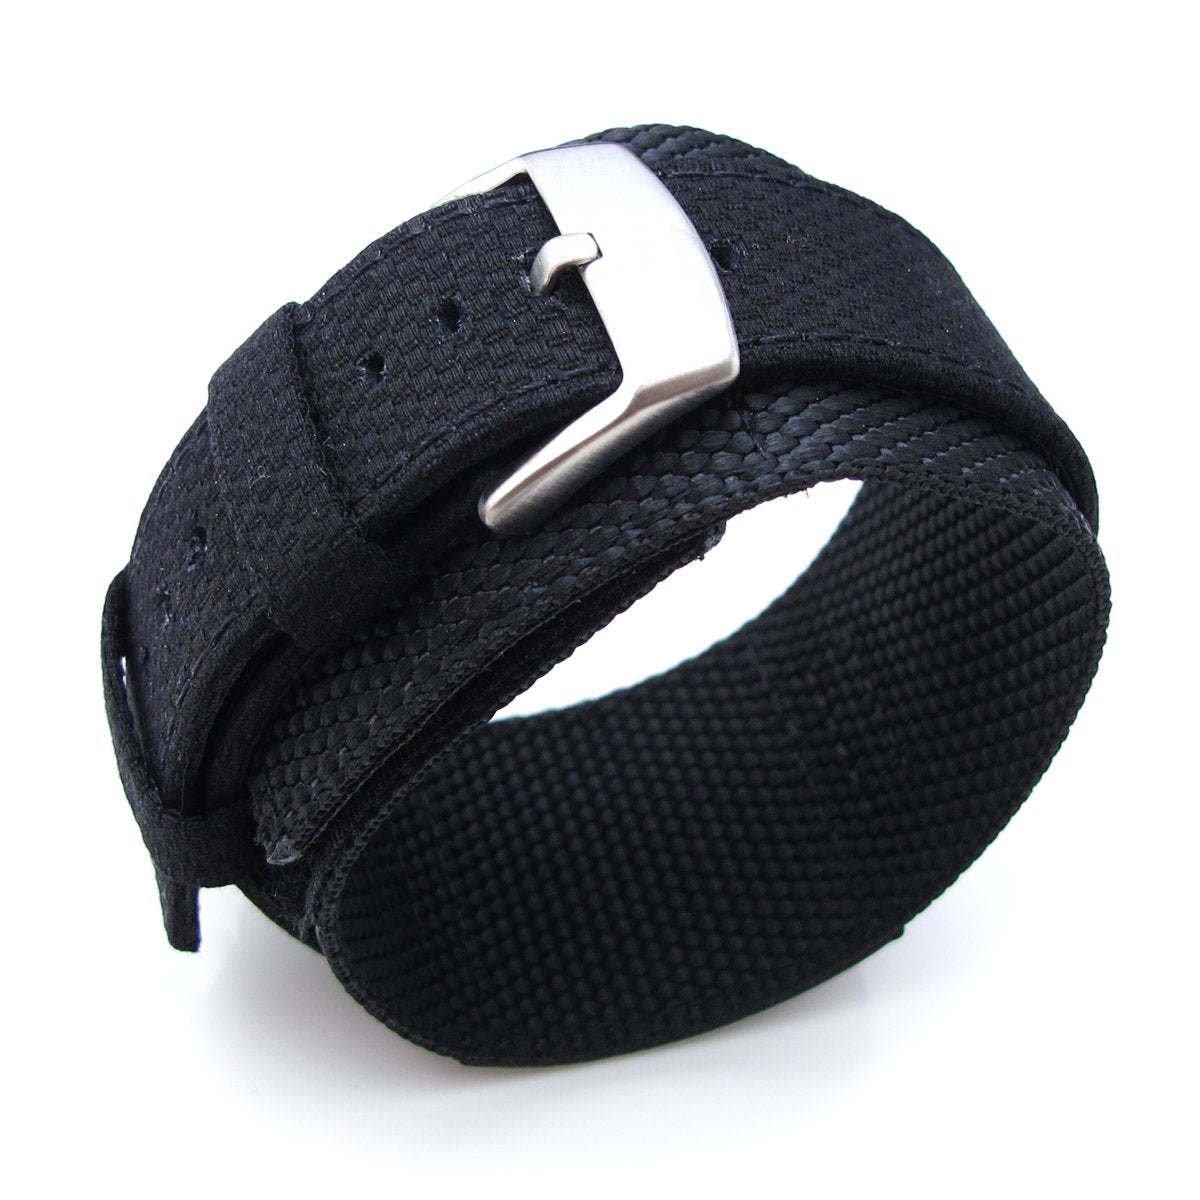 MiLTAT 24mm Double Layer Nylon Black Tactical Velcro Watch Strap design for 44mm Panerai Watches Strapcode Watch Bands